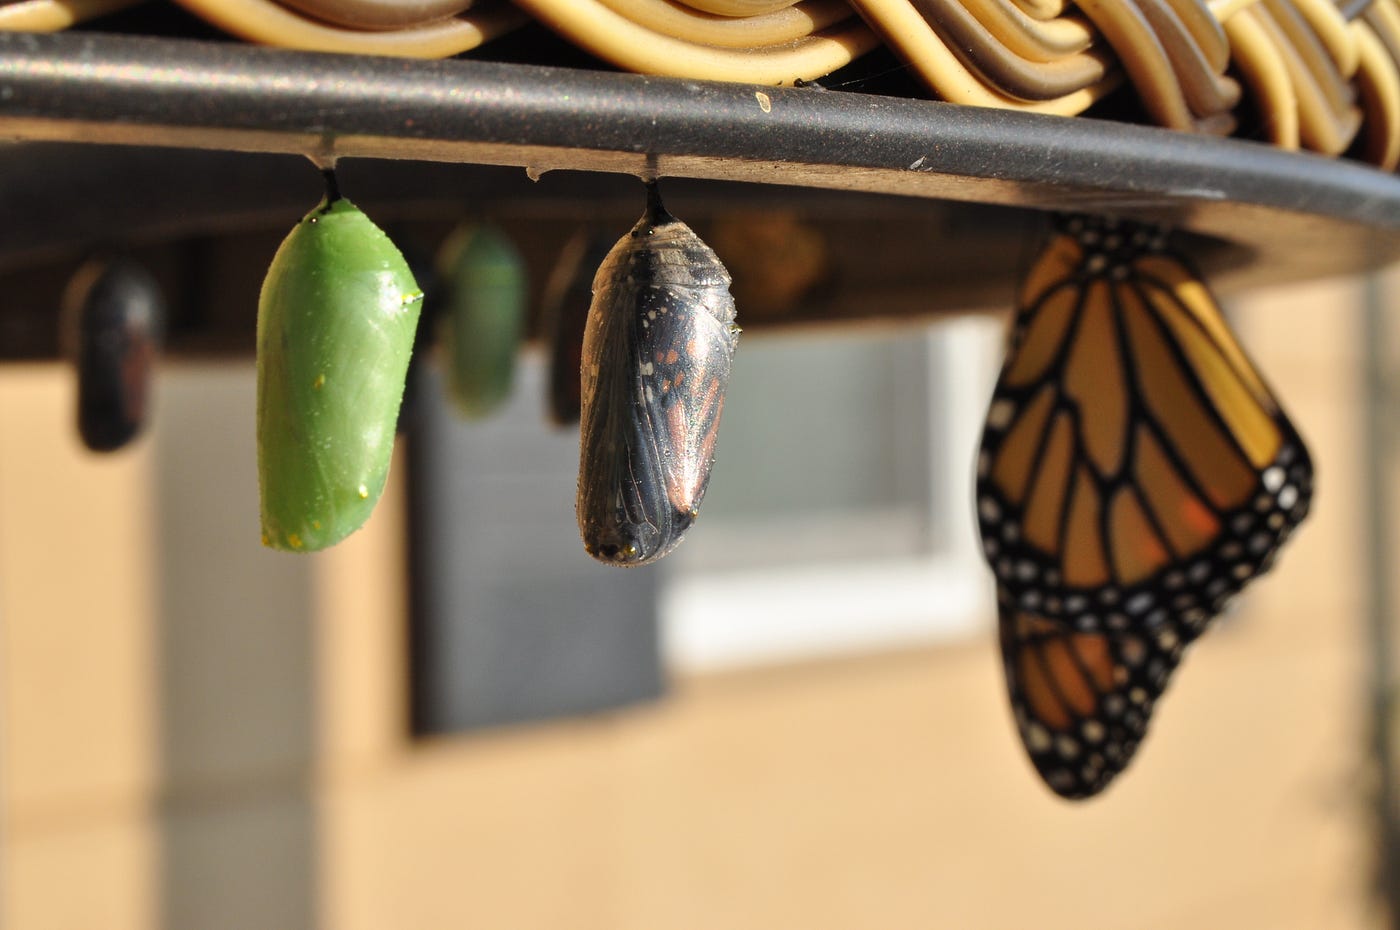 A picture showing cocoons and a butterfly.